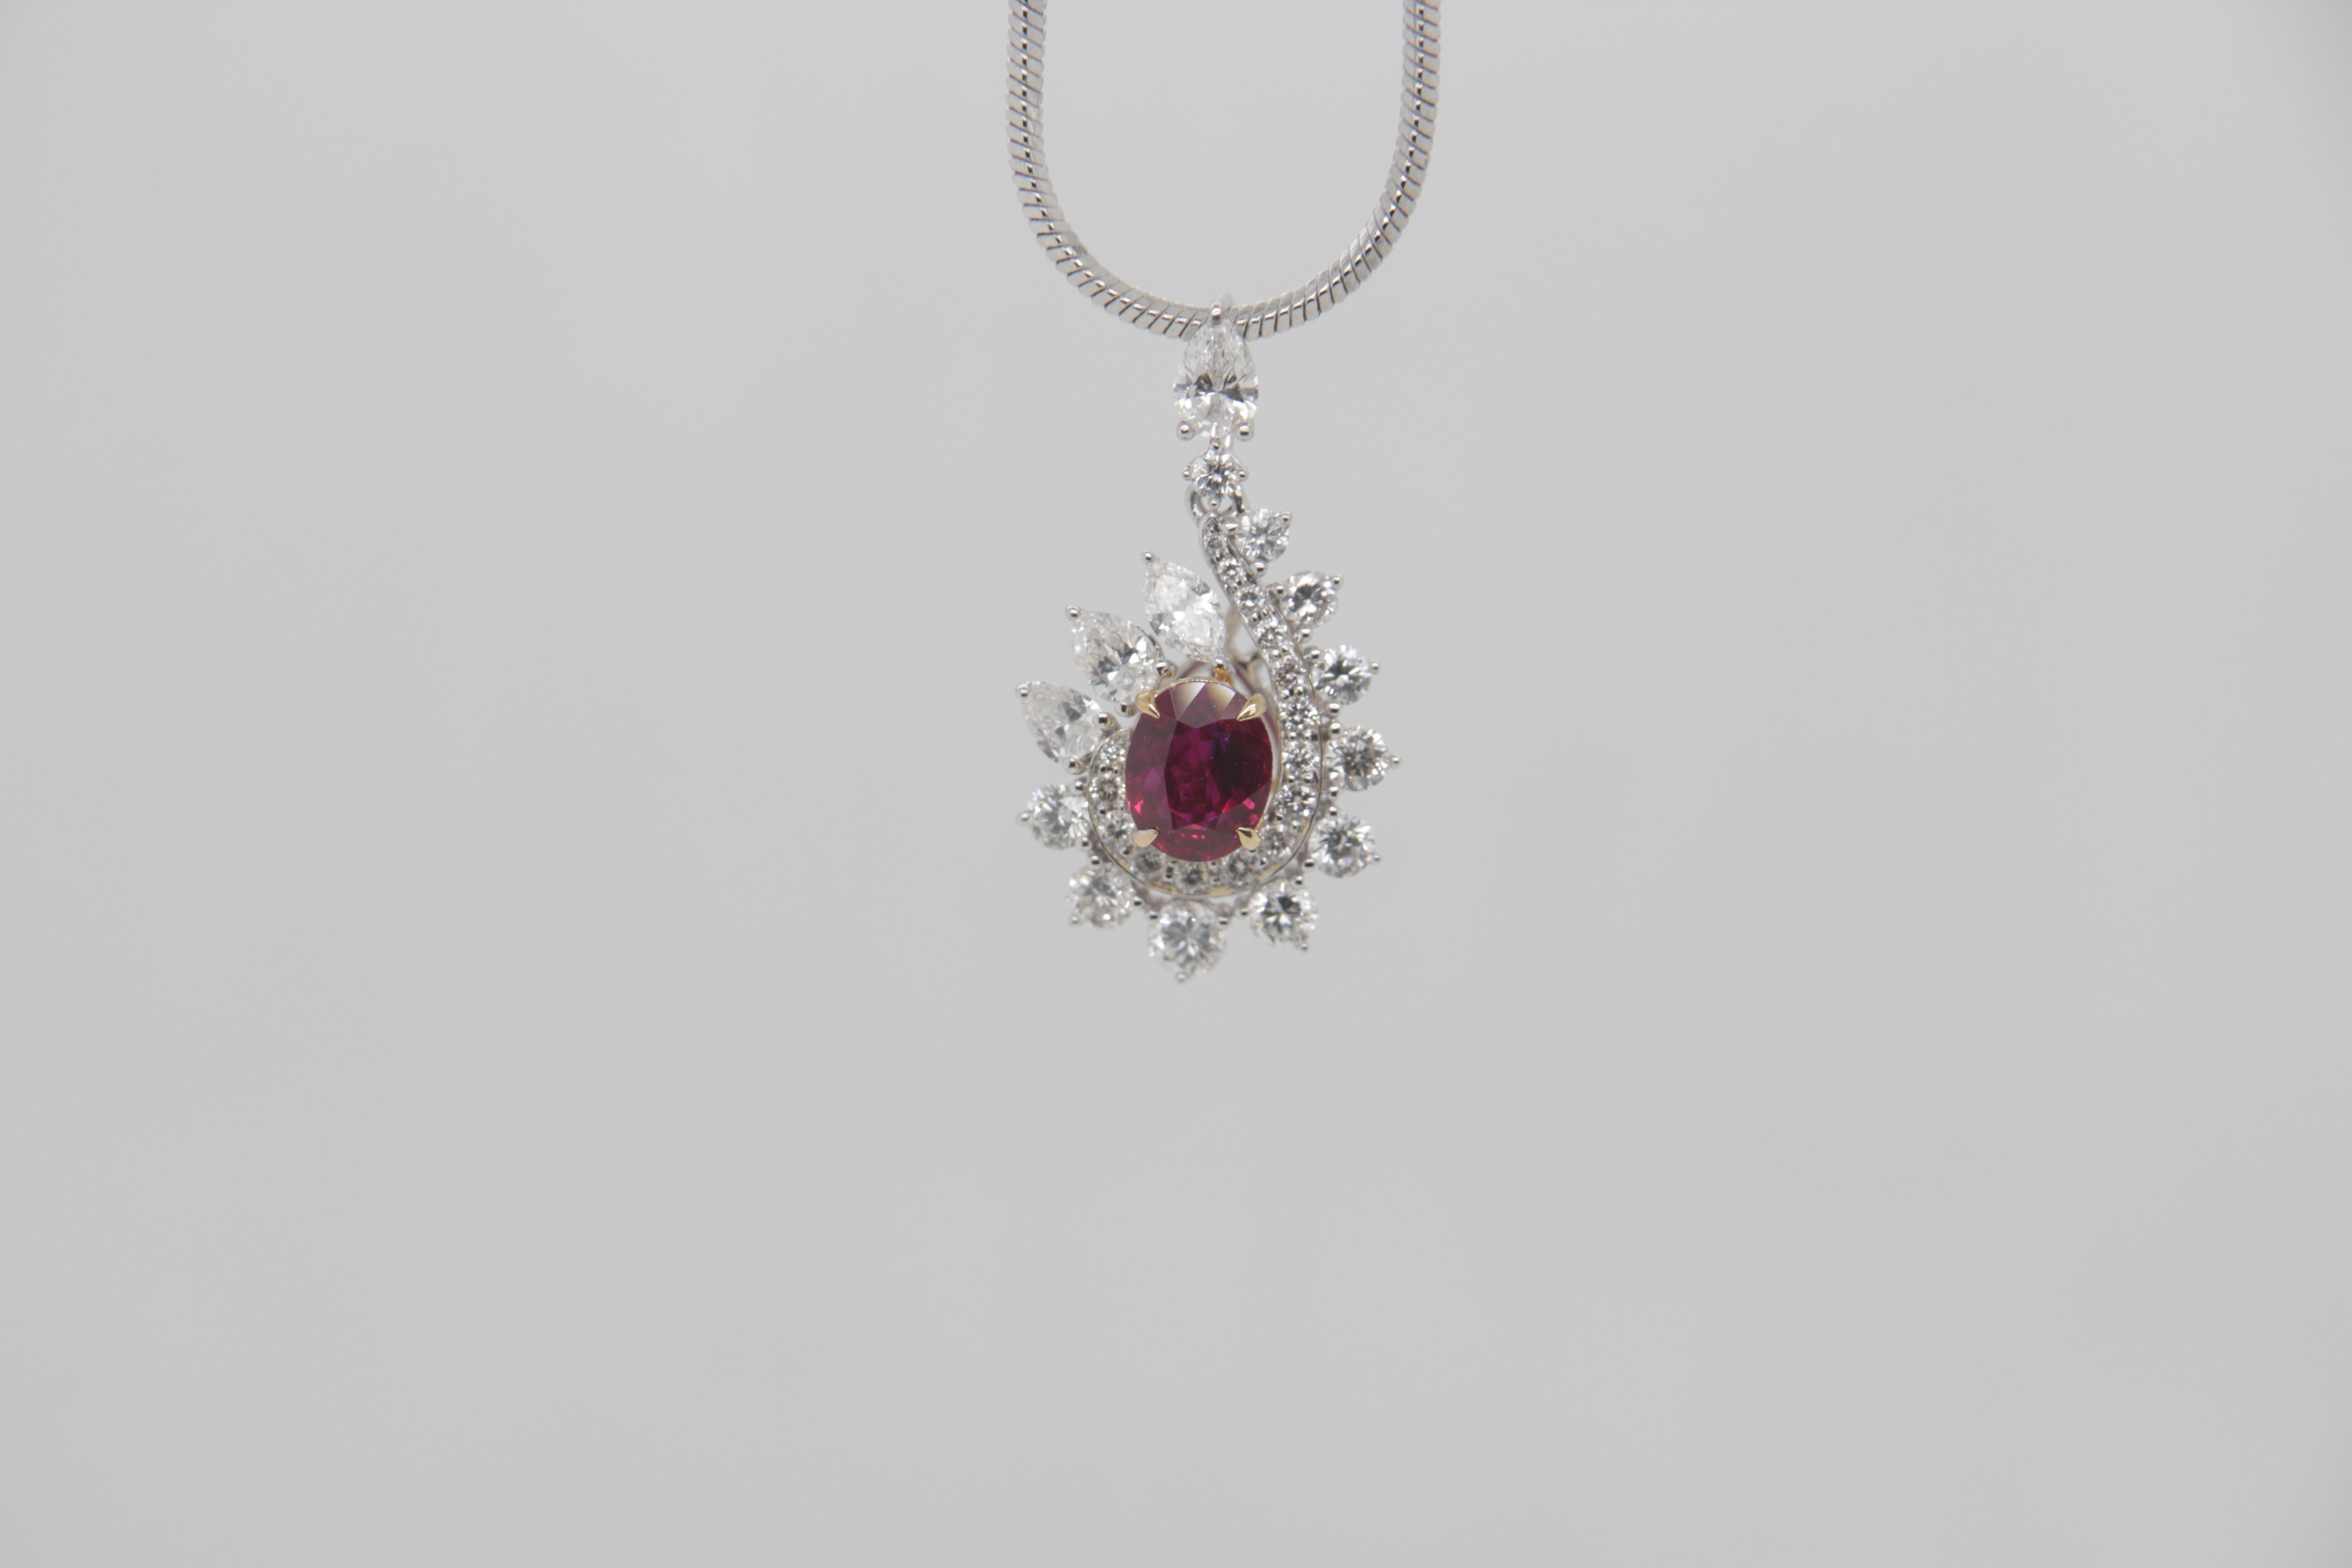 A brand new 0.74 carat Burmese ruby pendant mounted with diamonds in 18 Karat gold. The ruby weighs 0.74 carat and is certified by Gem Research Swisslab (GRS) as natural, no heat, and 'Vivid Red Pigeon's Blood'. The total diamond weight is 0.86